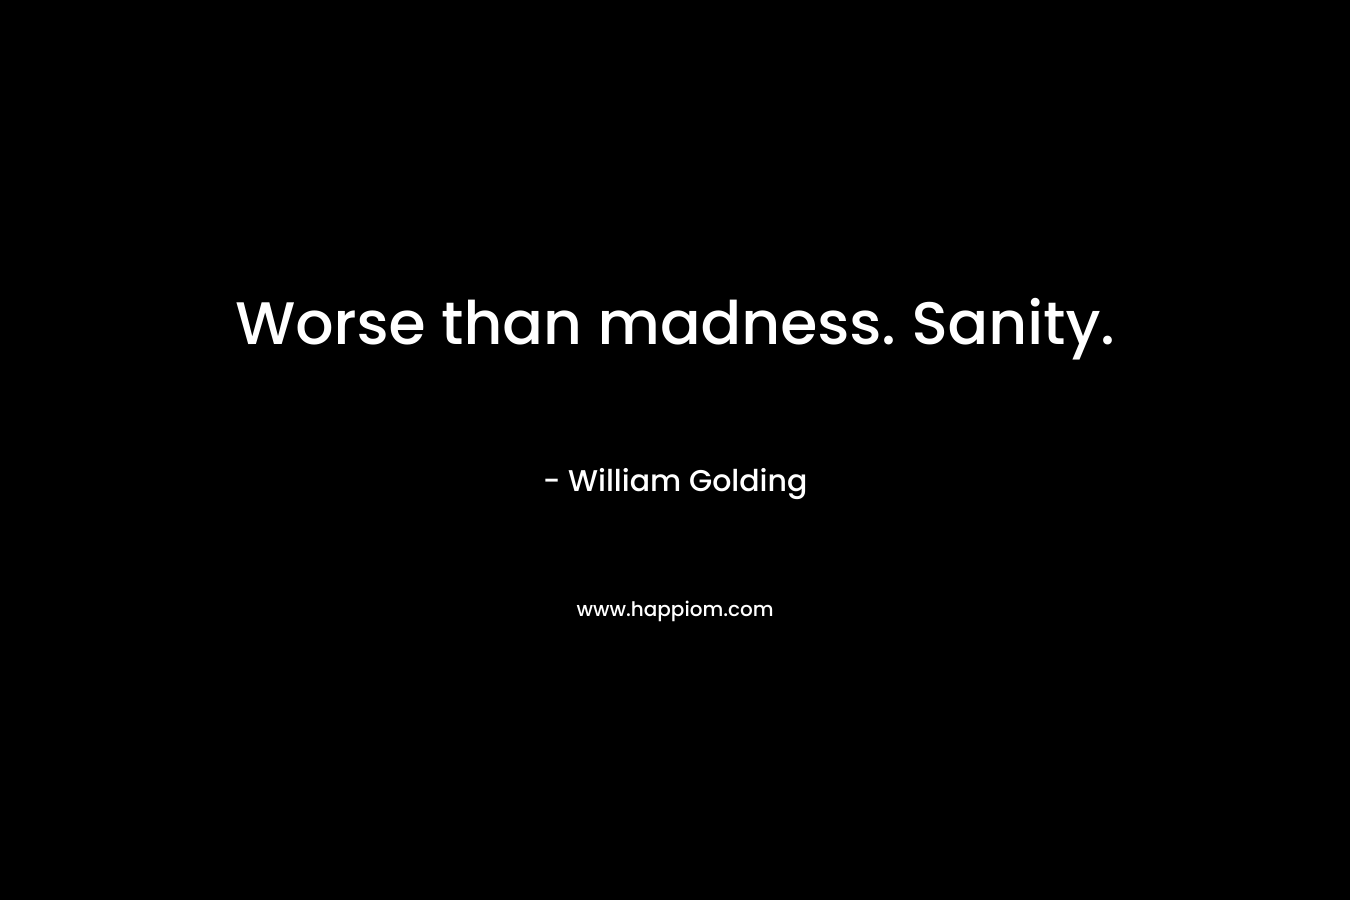 Worse than madness. Sanity. – William Golding